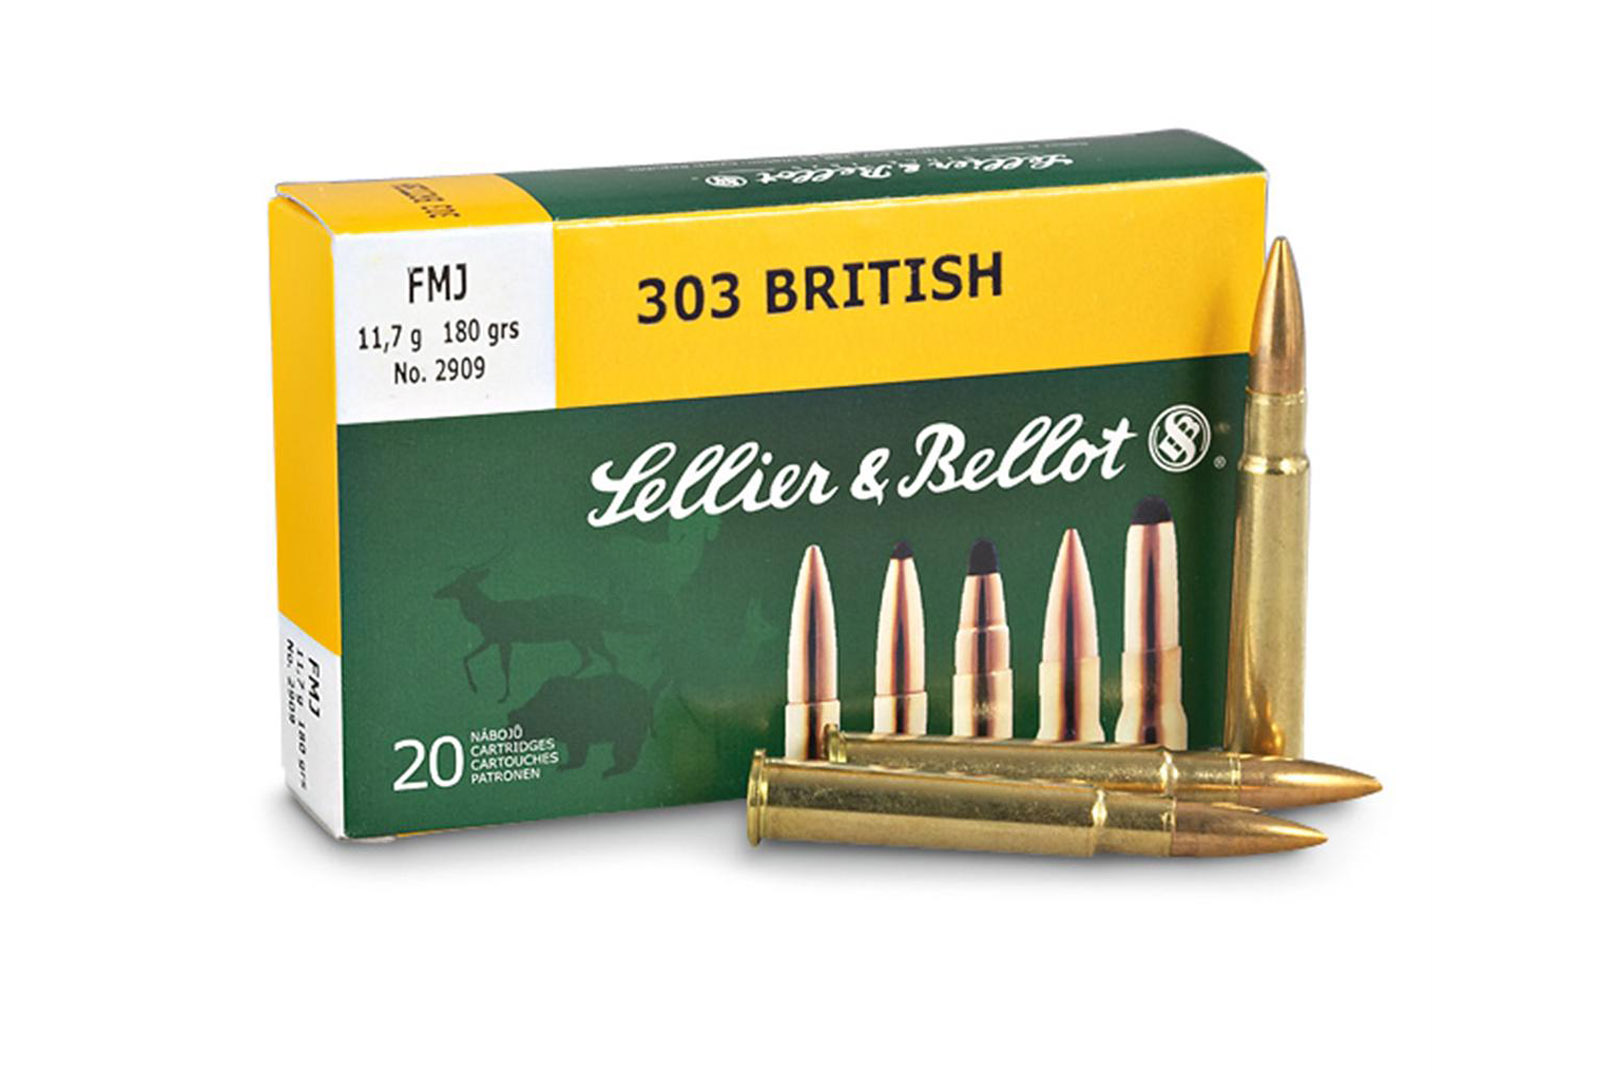 Lee Enfield 303 British Sporterized - Canada First Ammo Corp.